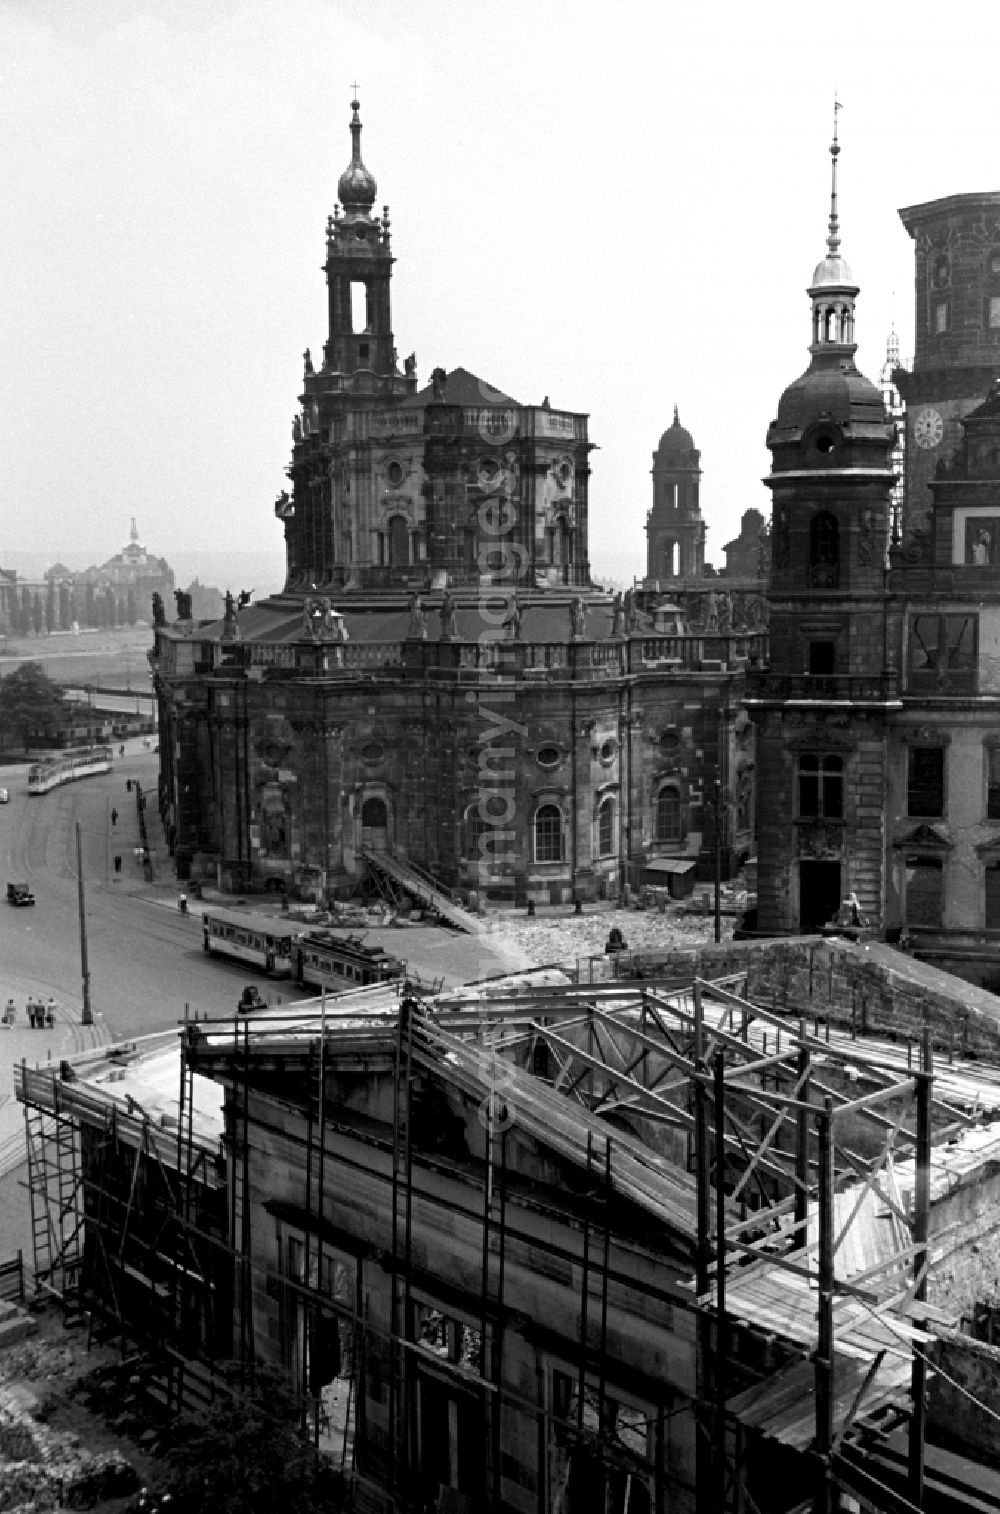 GDR photo archive: Dresden - Construction site for the reconstruction of the war-damaged ruins of the Dresden Zwinger on Theaterplatz - Sophienstrasse in the Altstadt district of Dresden in the state of Saxony on the territory of the former GDR, German Democratic Republic